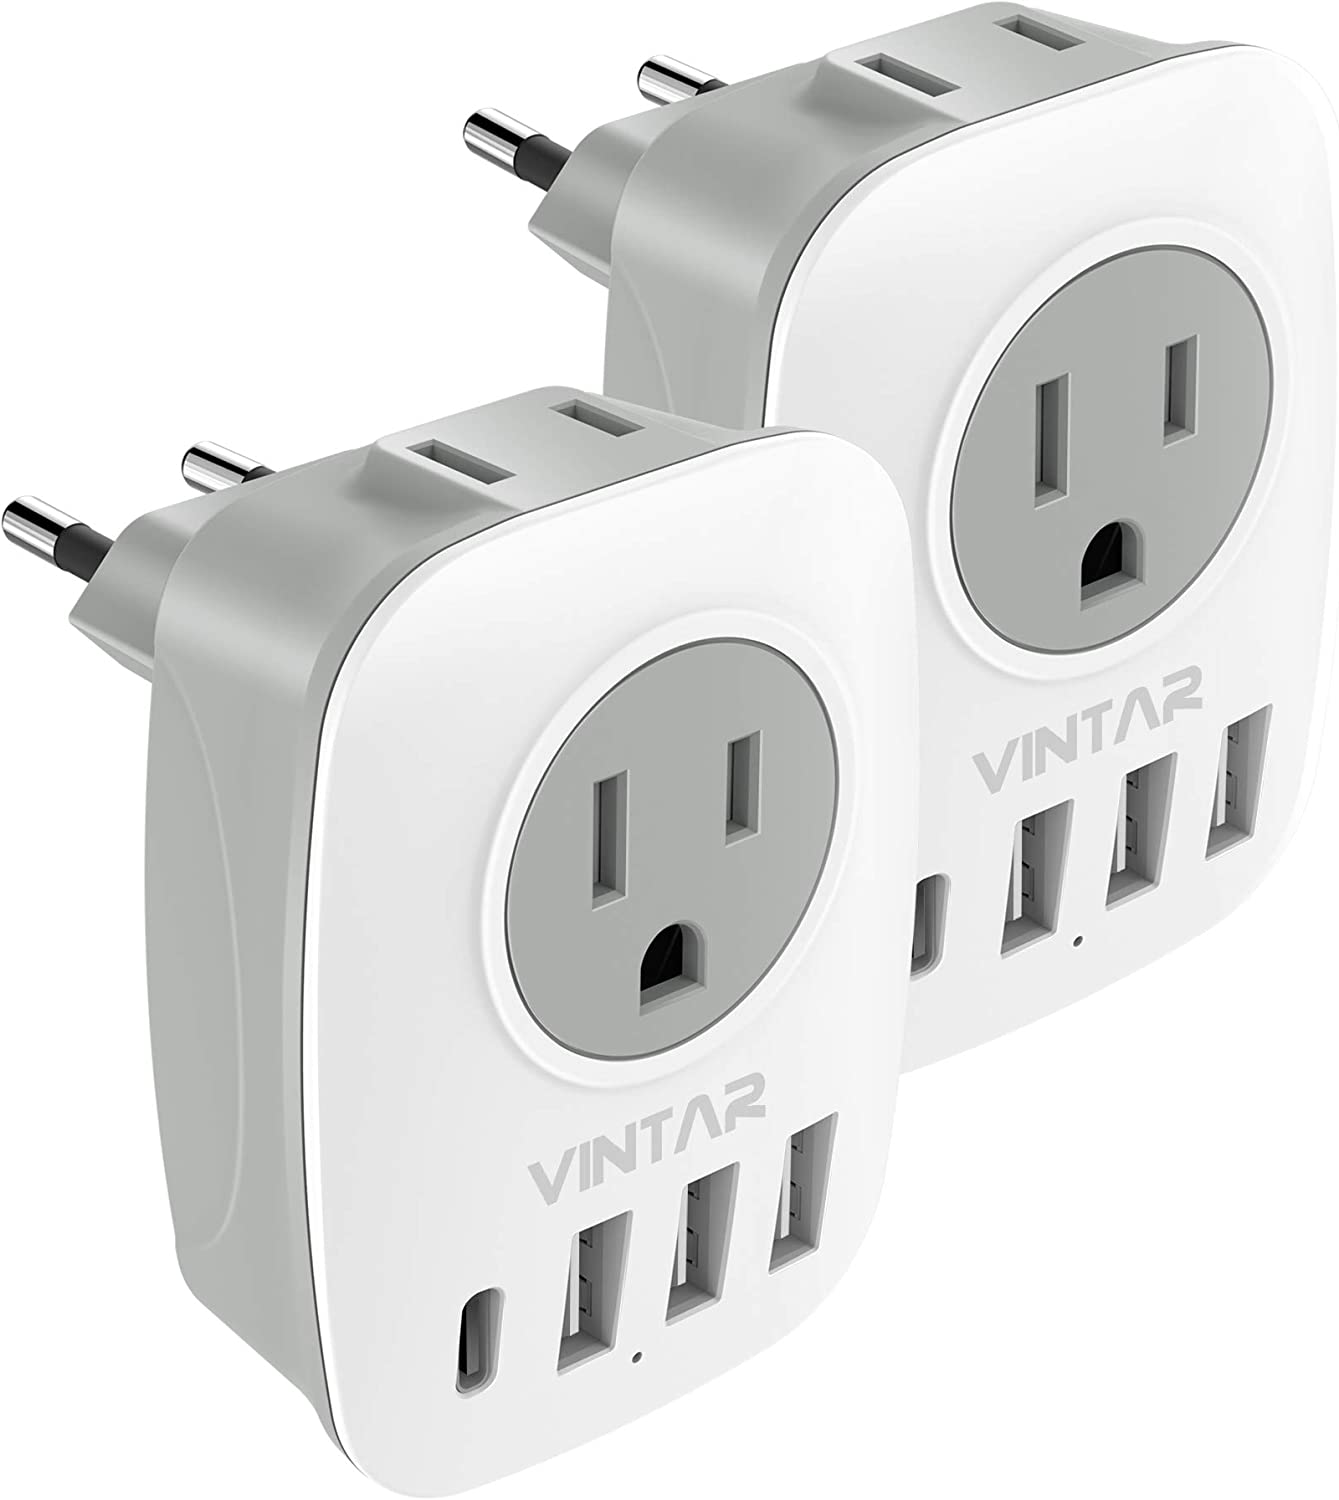 [2-Pack] European Travel Plug Adapter, VINTAR International Power Adaptor with 1 USB C, 2 American Outlets and 3 USB Ports, 6 in 1 Travel Essentials to Most... by VINTAR on Amazon - honeymoon gift ideas for newlyweds - The Wedding Club